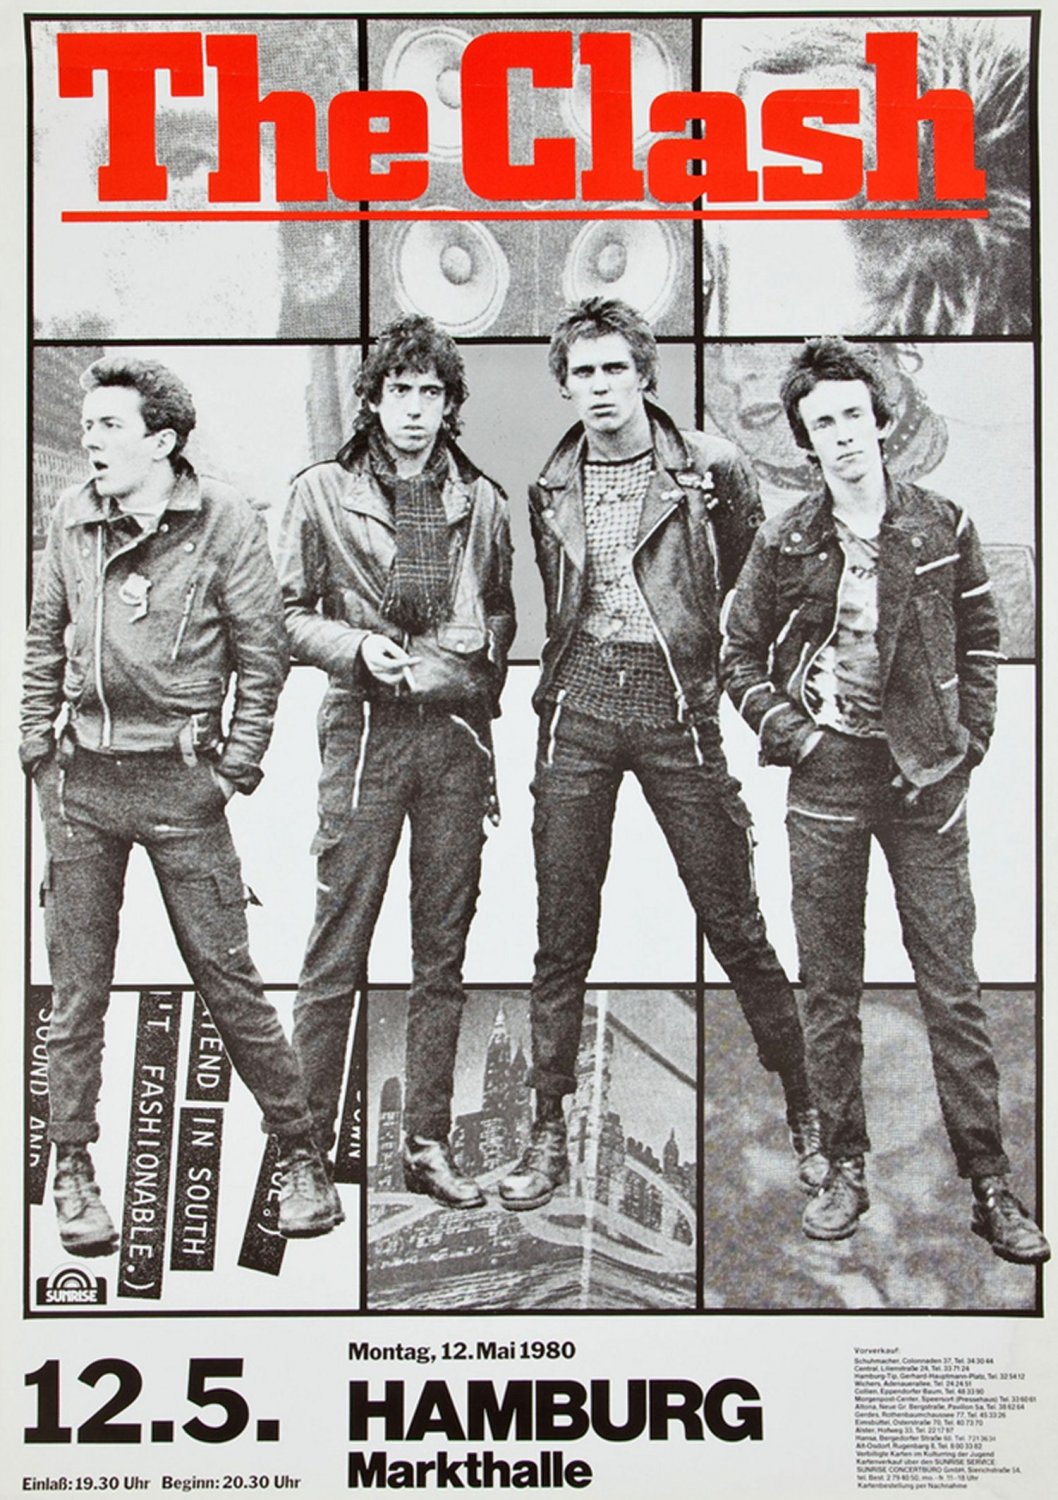 The Clash Band Music Poster 13x19 inches